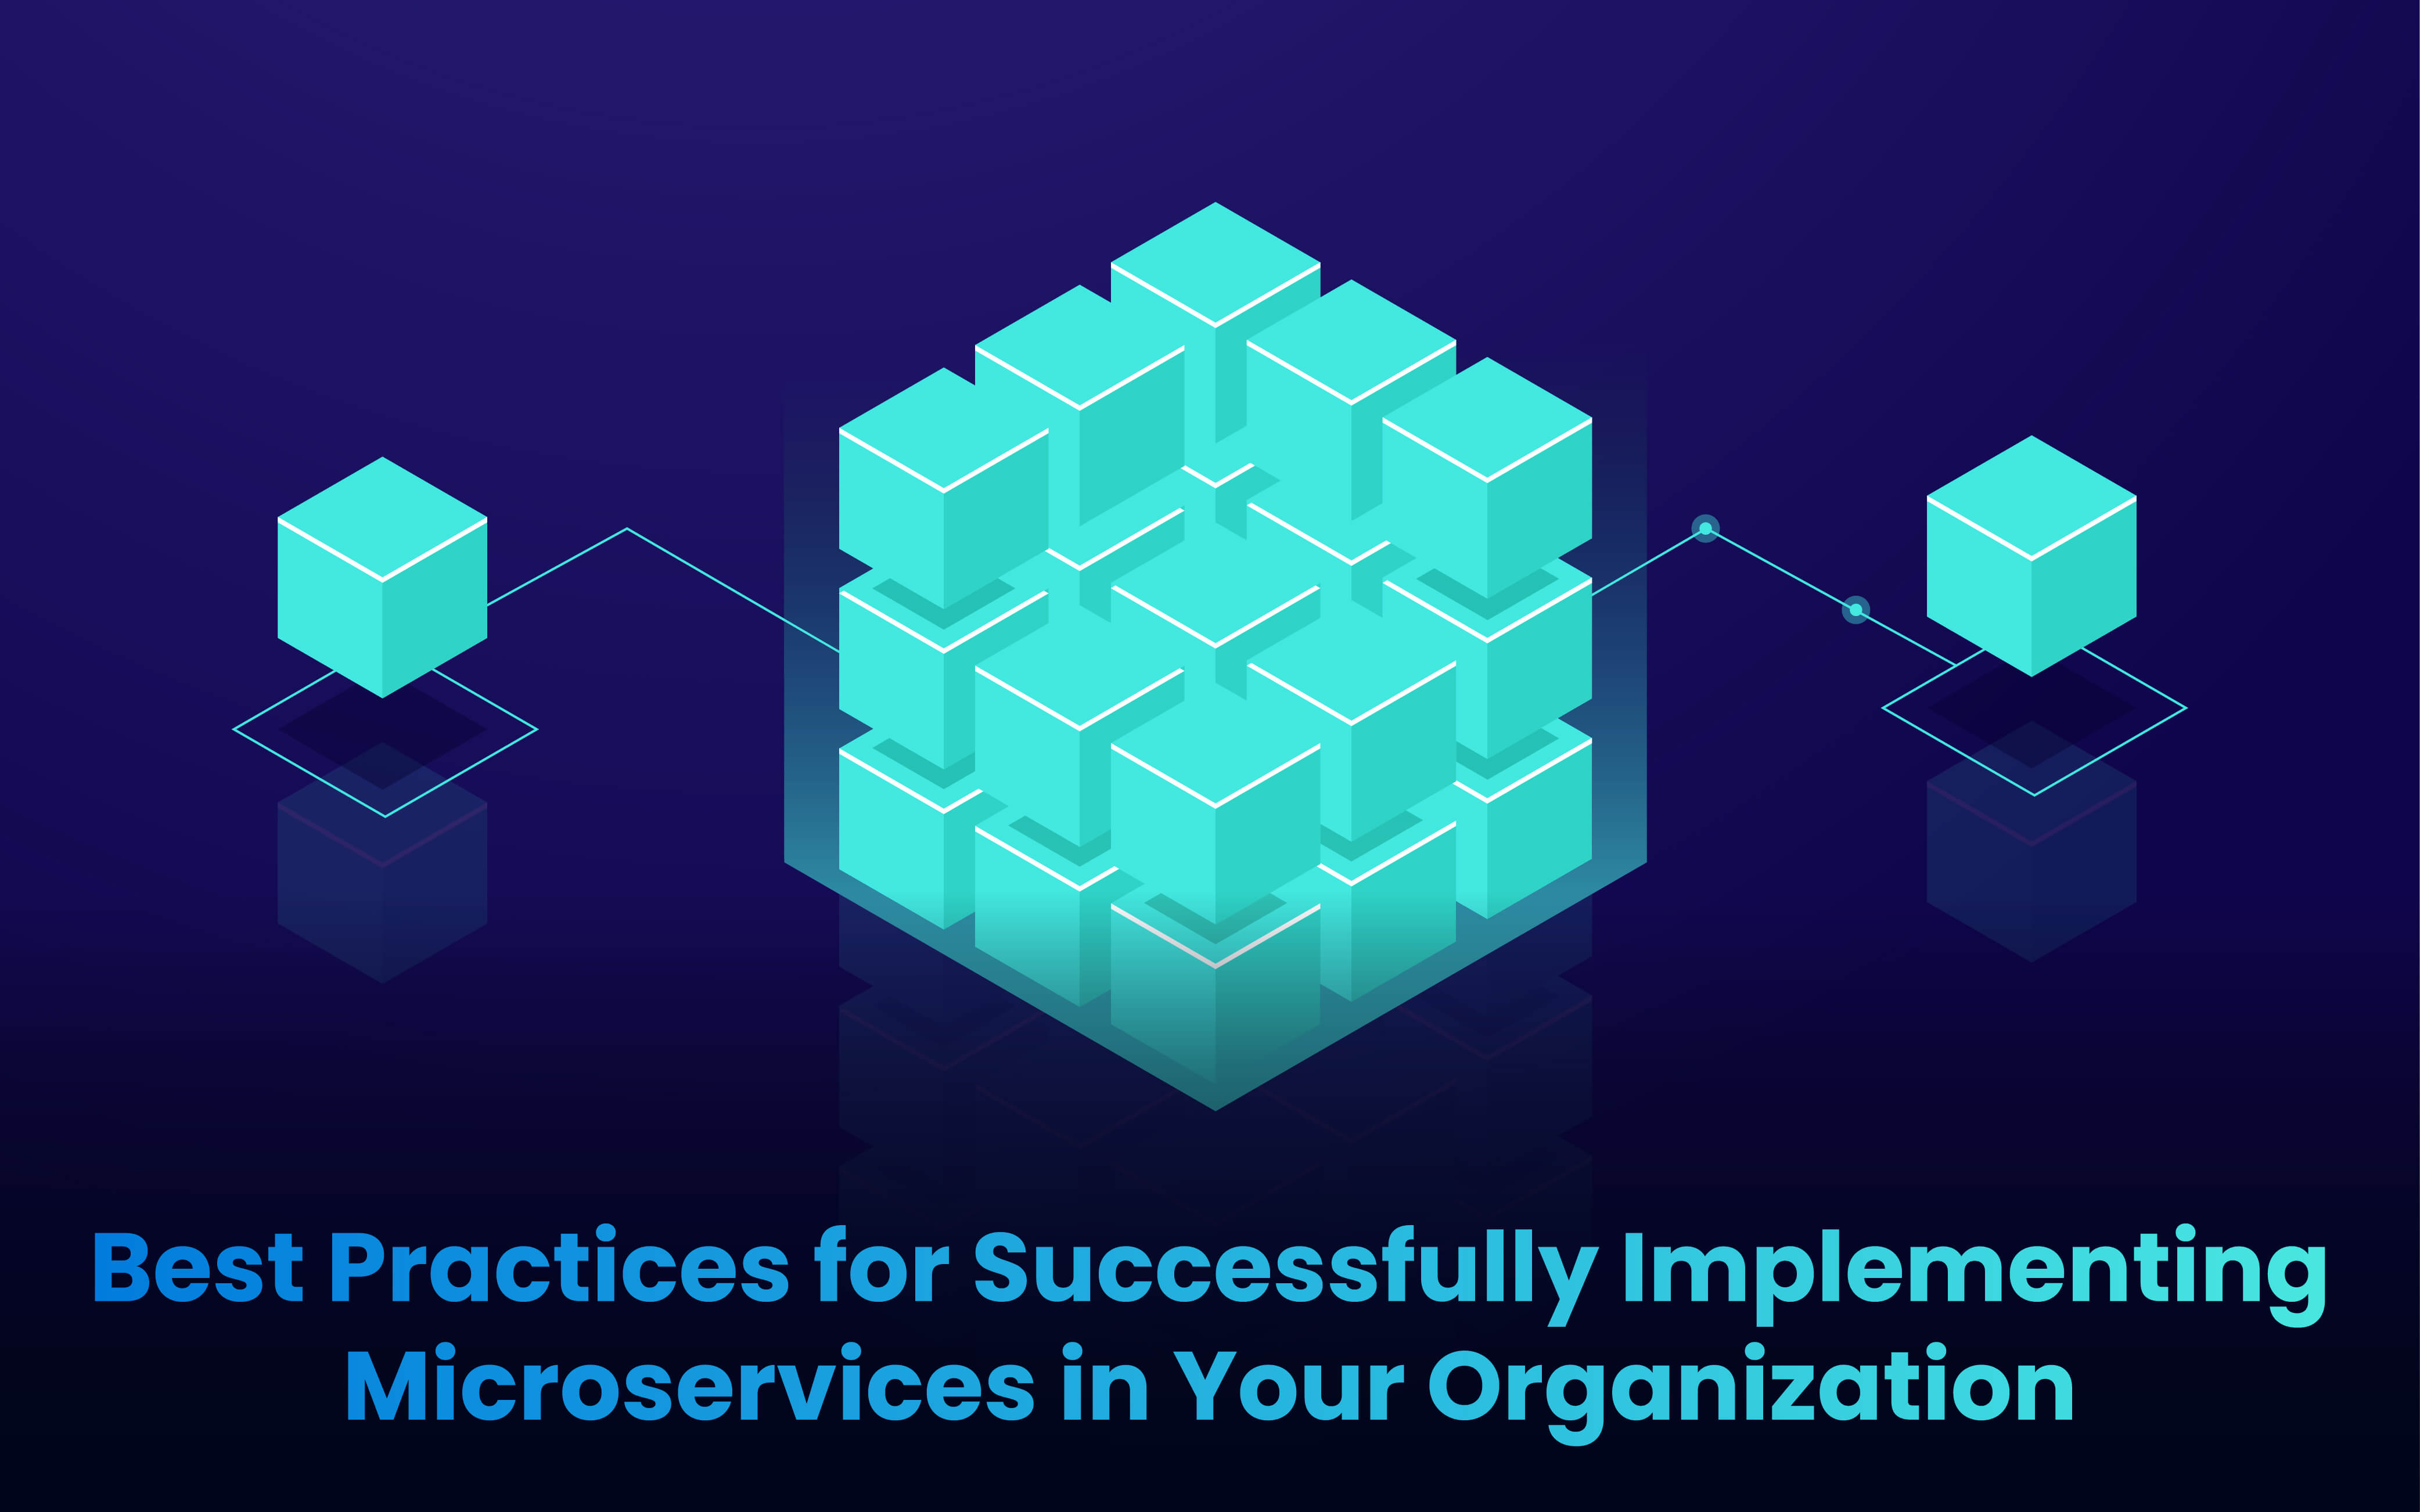 Best Practices for Successfully Implementing Microservices in Your Organization